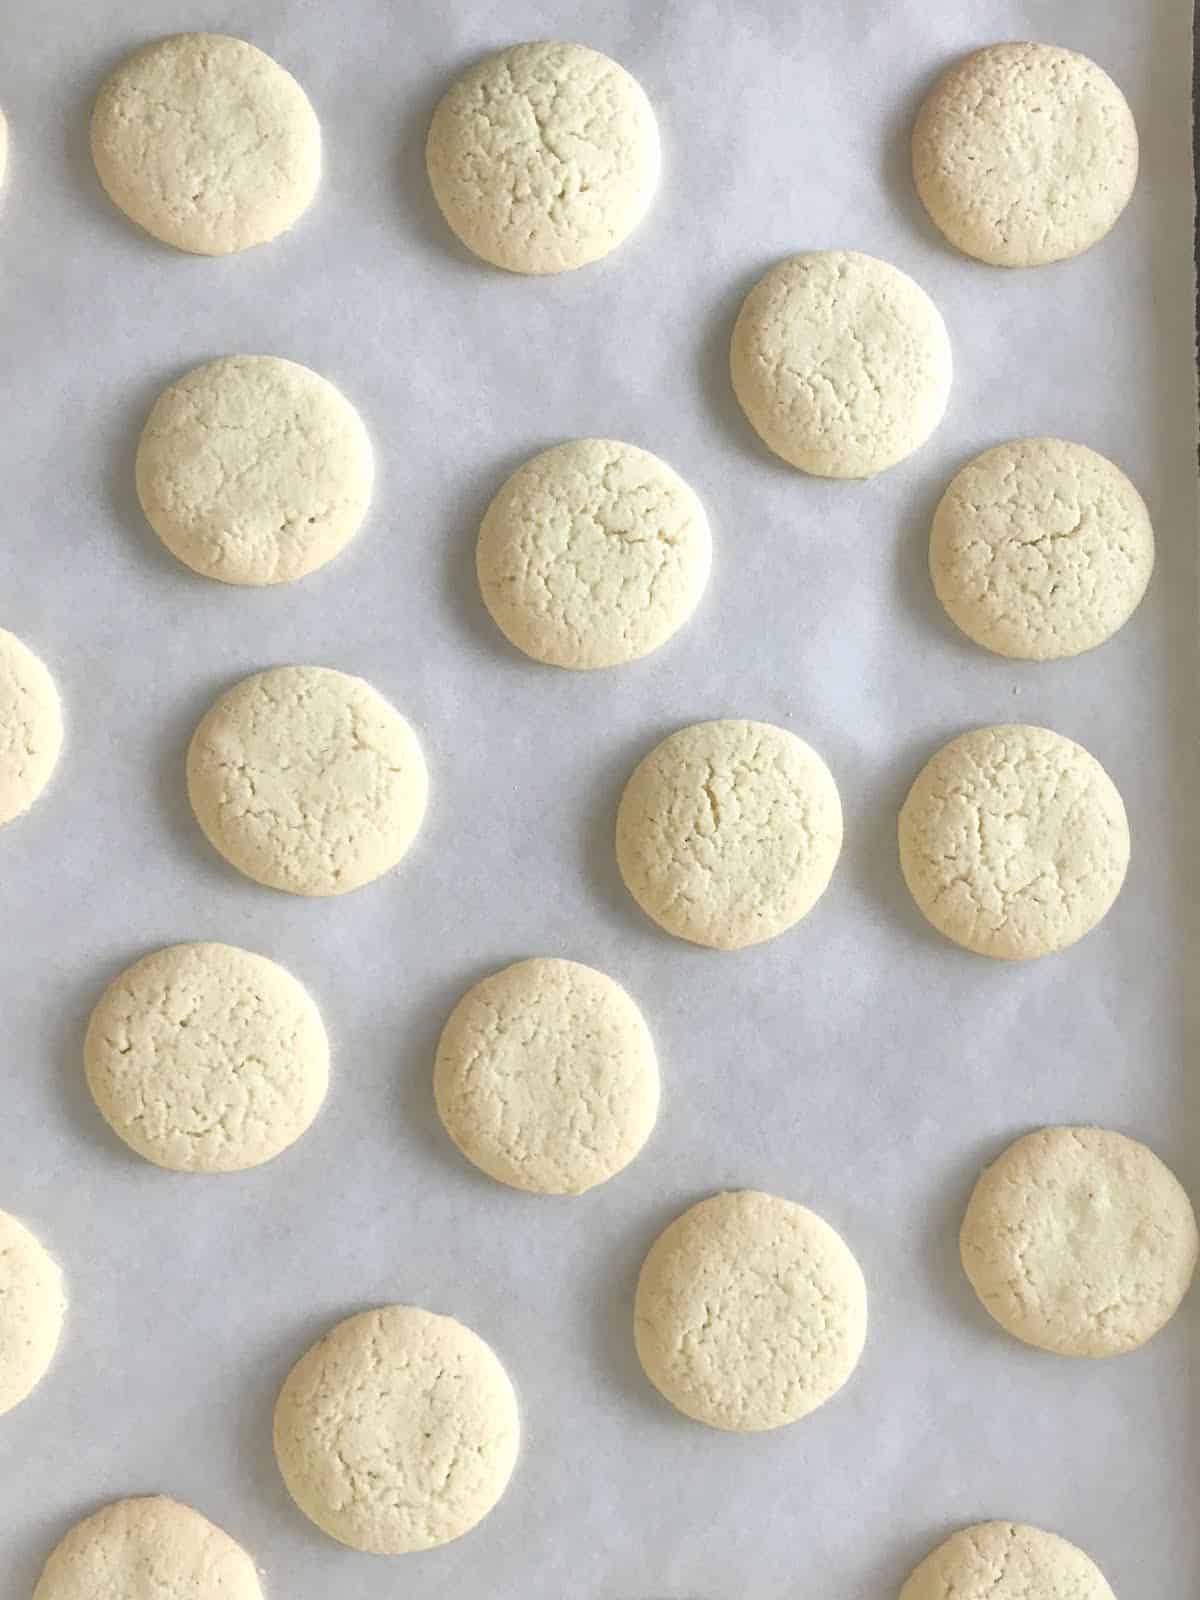 Baked cornstarch cookies on white parchment paper.